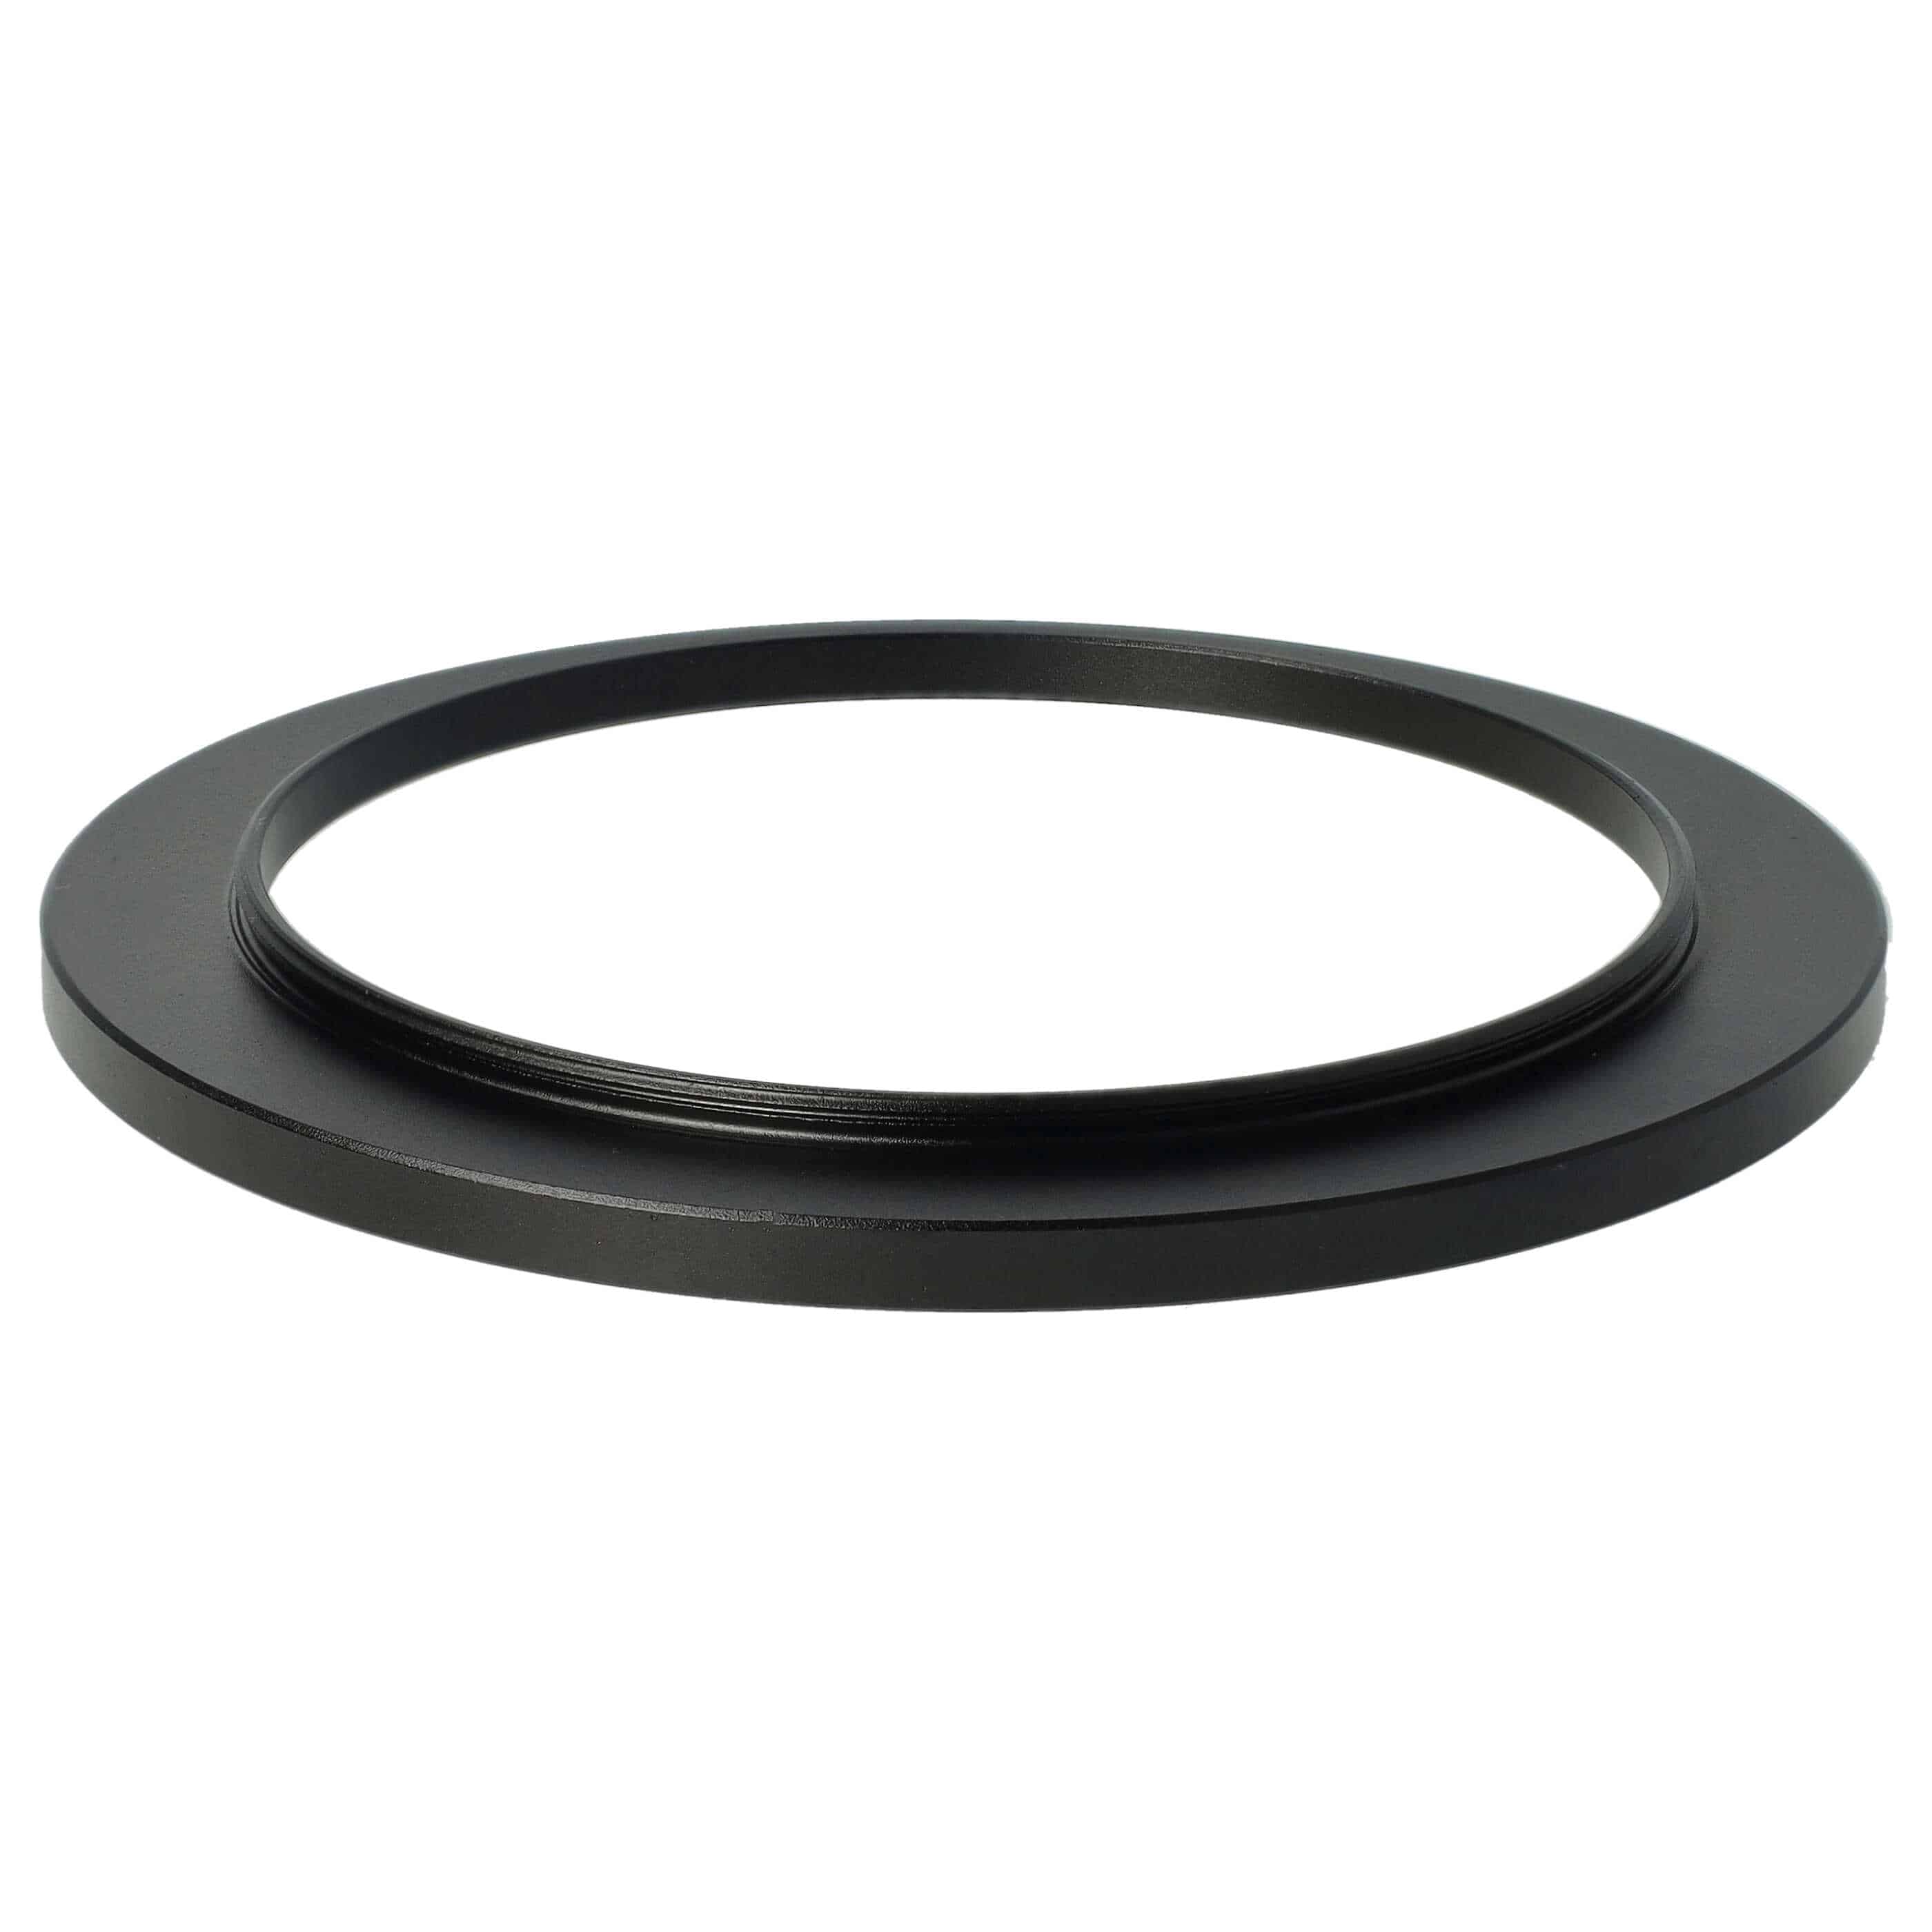 Step-Up Ring Adapter of 67 mm to 82 mmfor various Camera Lens - Filter Adapter